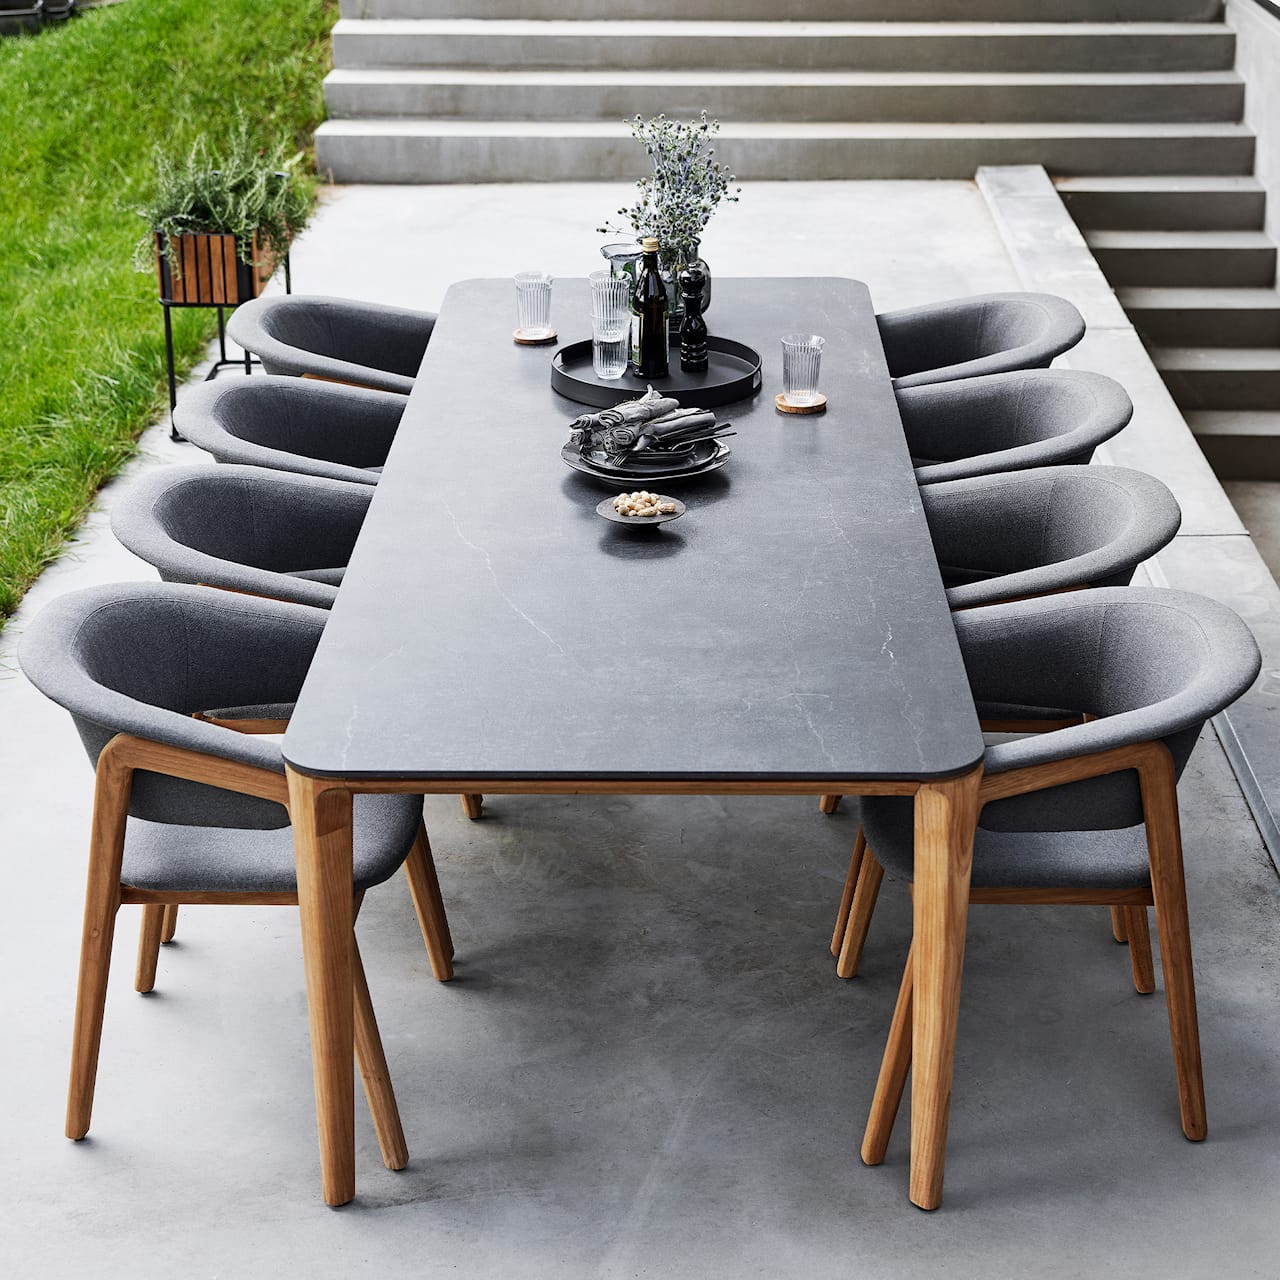 Aspect Dining table base